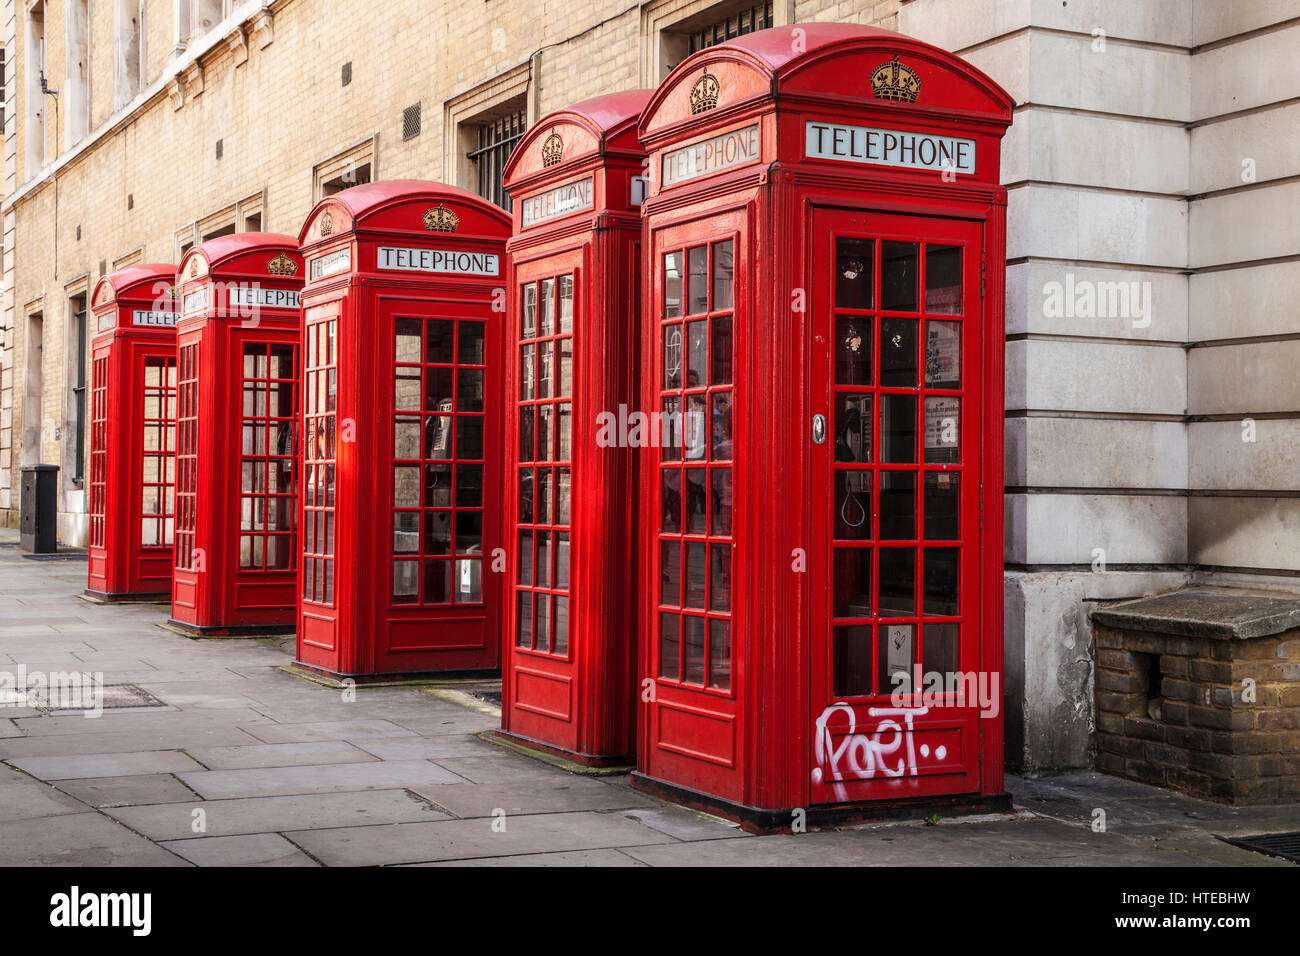 A row of red telephone boxes in London. Stock Photo